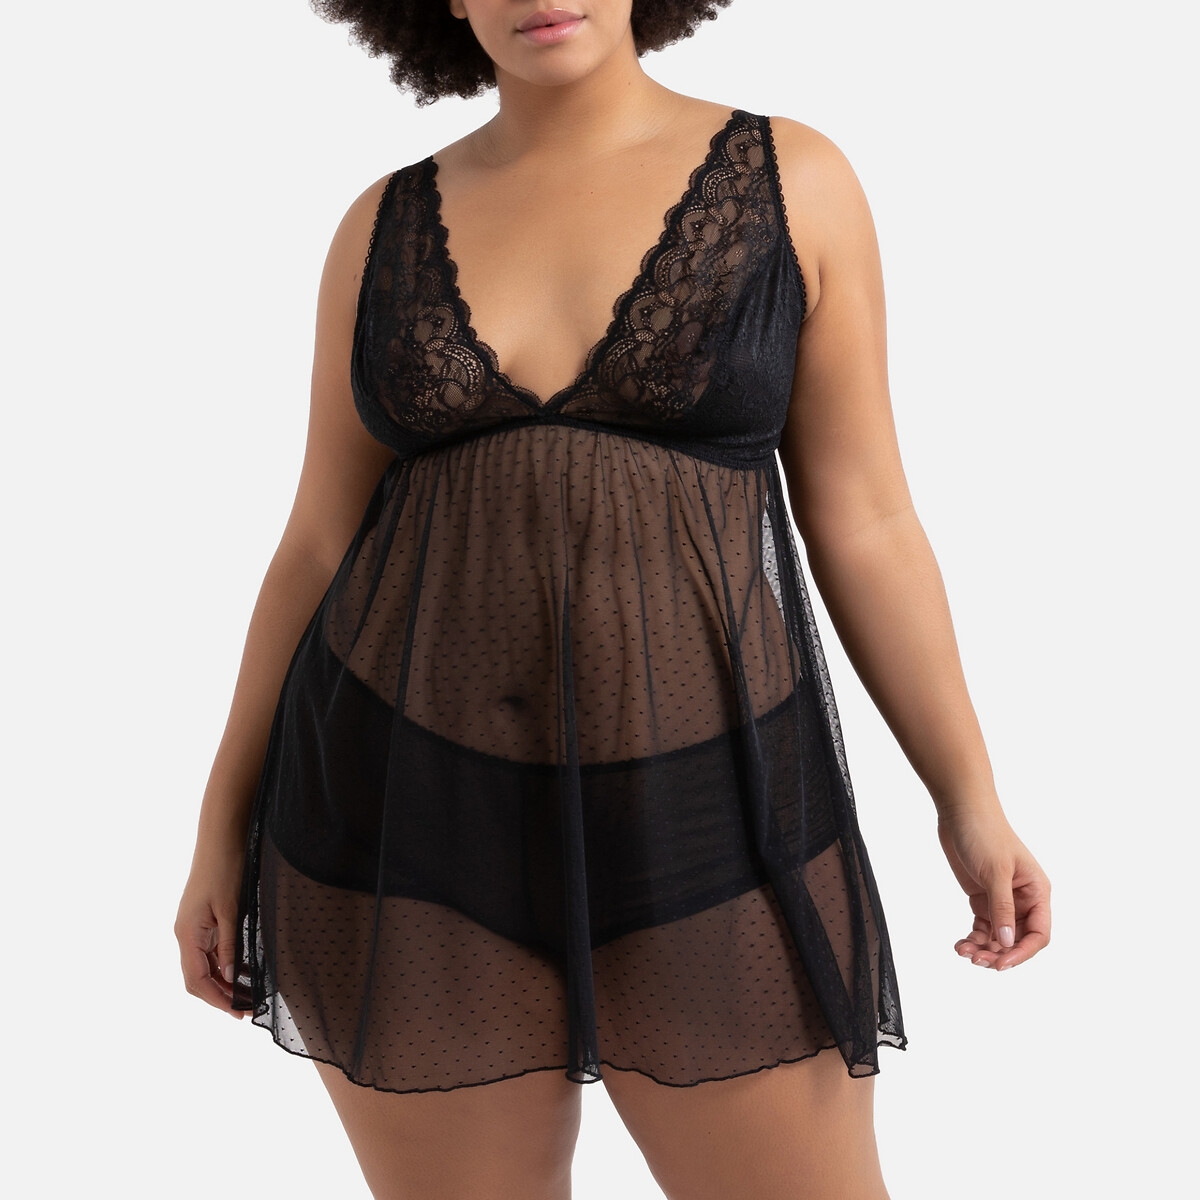 Lace/Dotted Tulle Babydoll Nightie